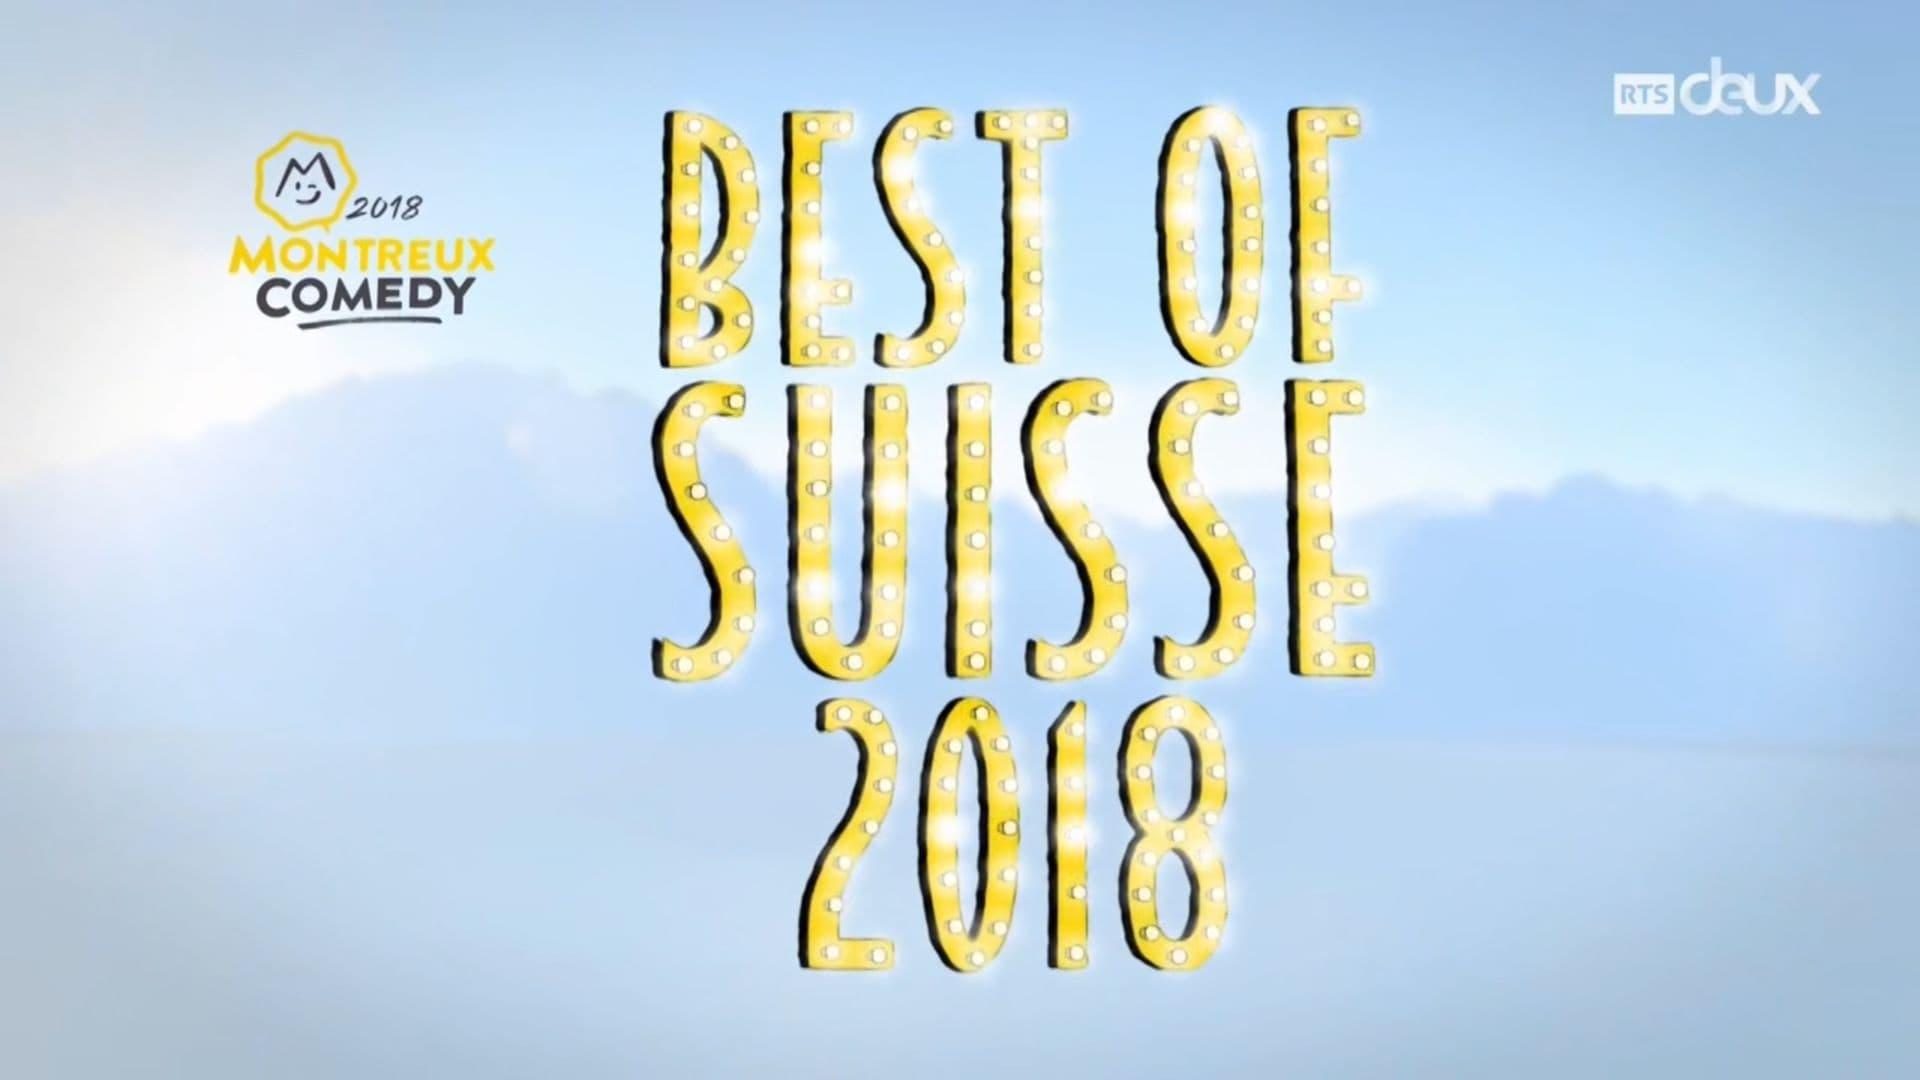 Montreux Comedy Festival 2017 - Best Of backdrop